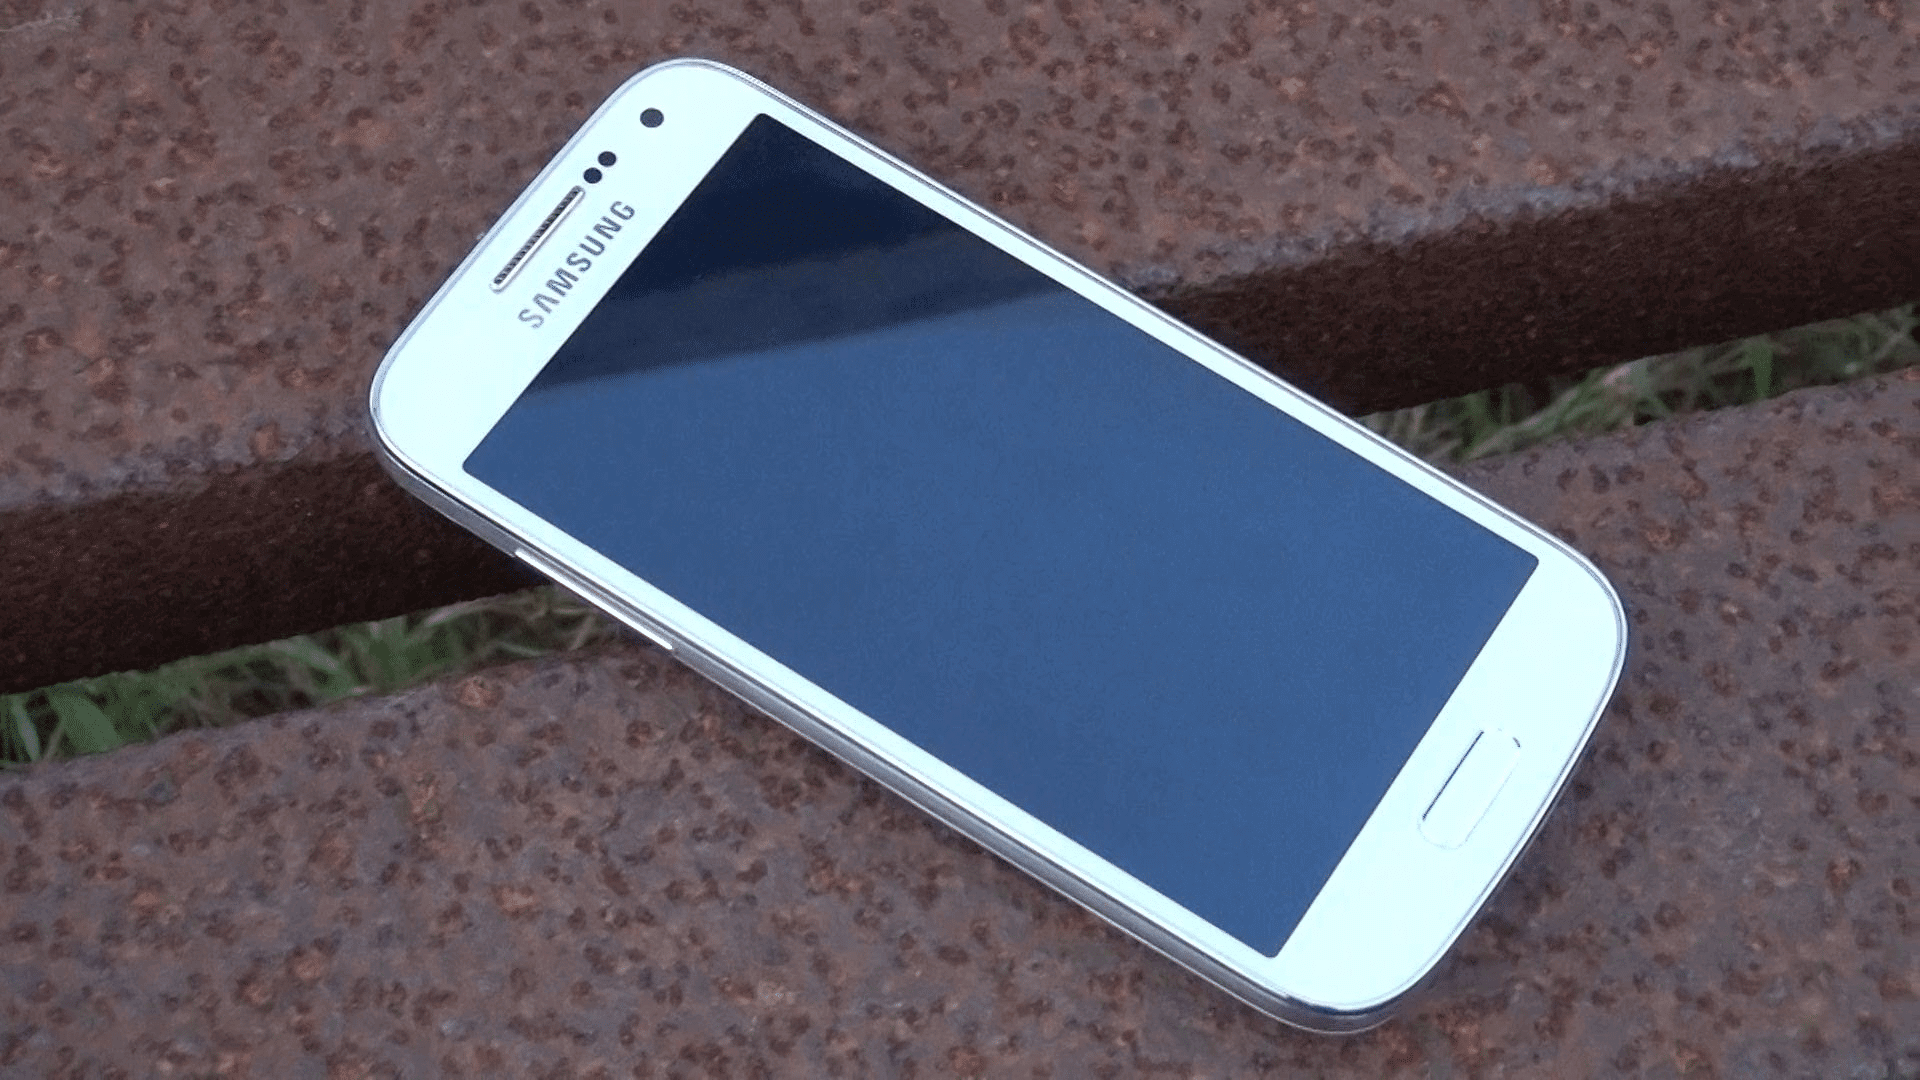 How To Update Galaxy S4 Mini I9195 To AICP Android 7.1.1 Nougat Custom ROM 1